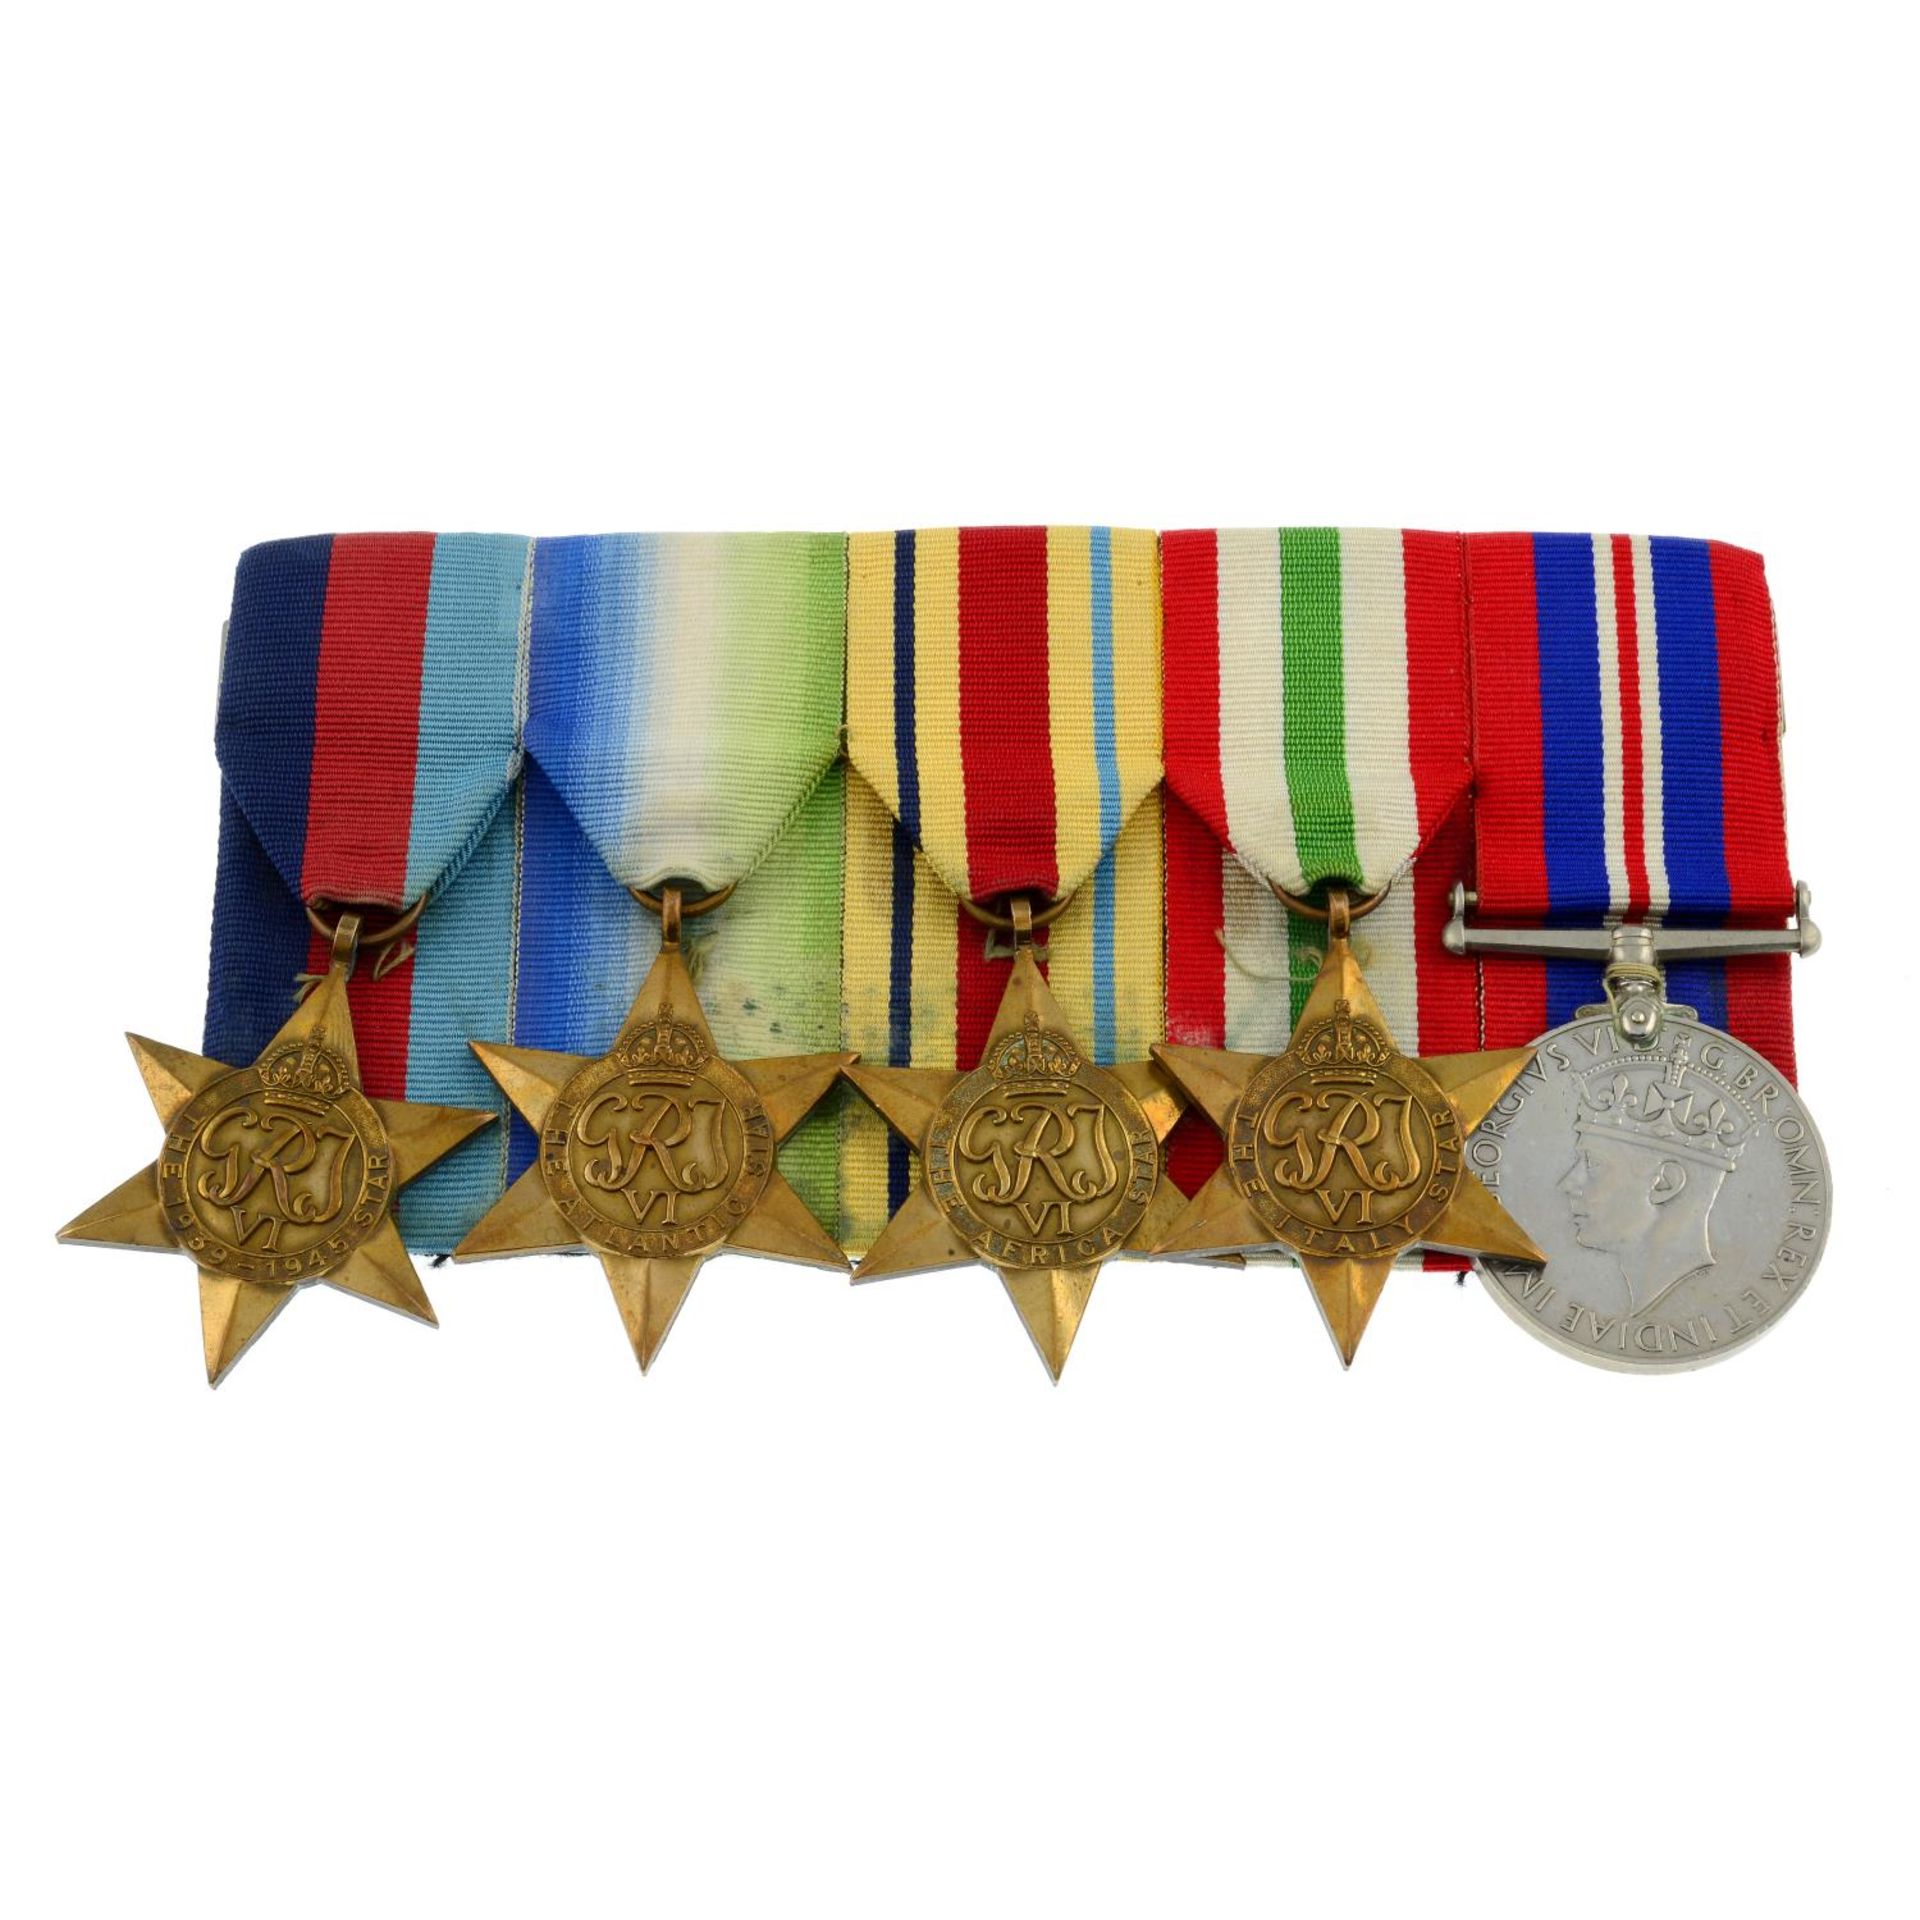 A group of five court mounted WWII medals,